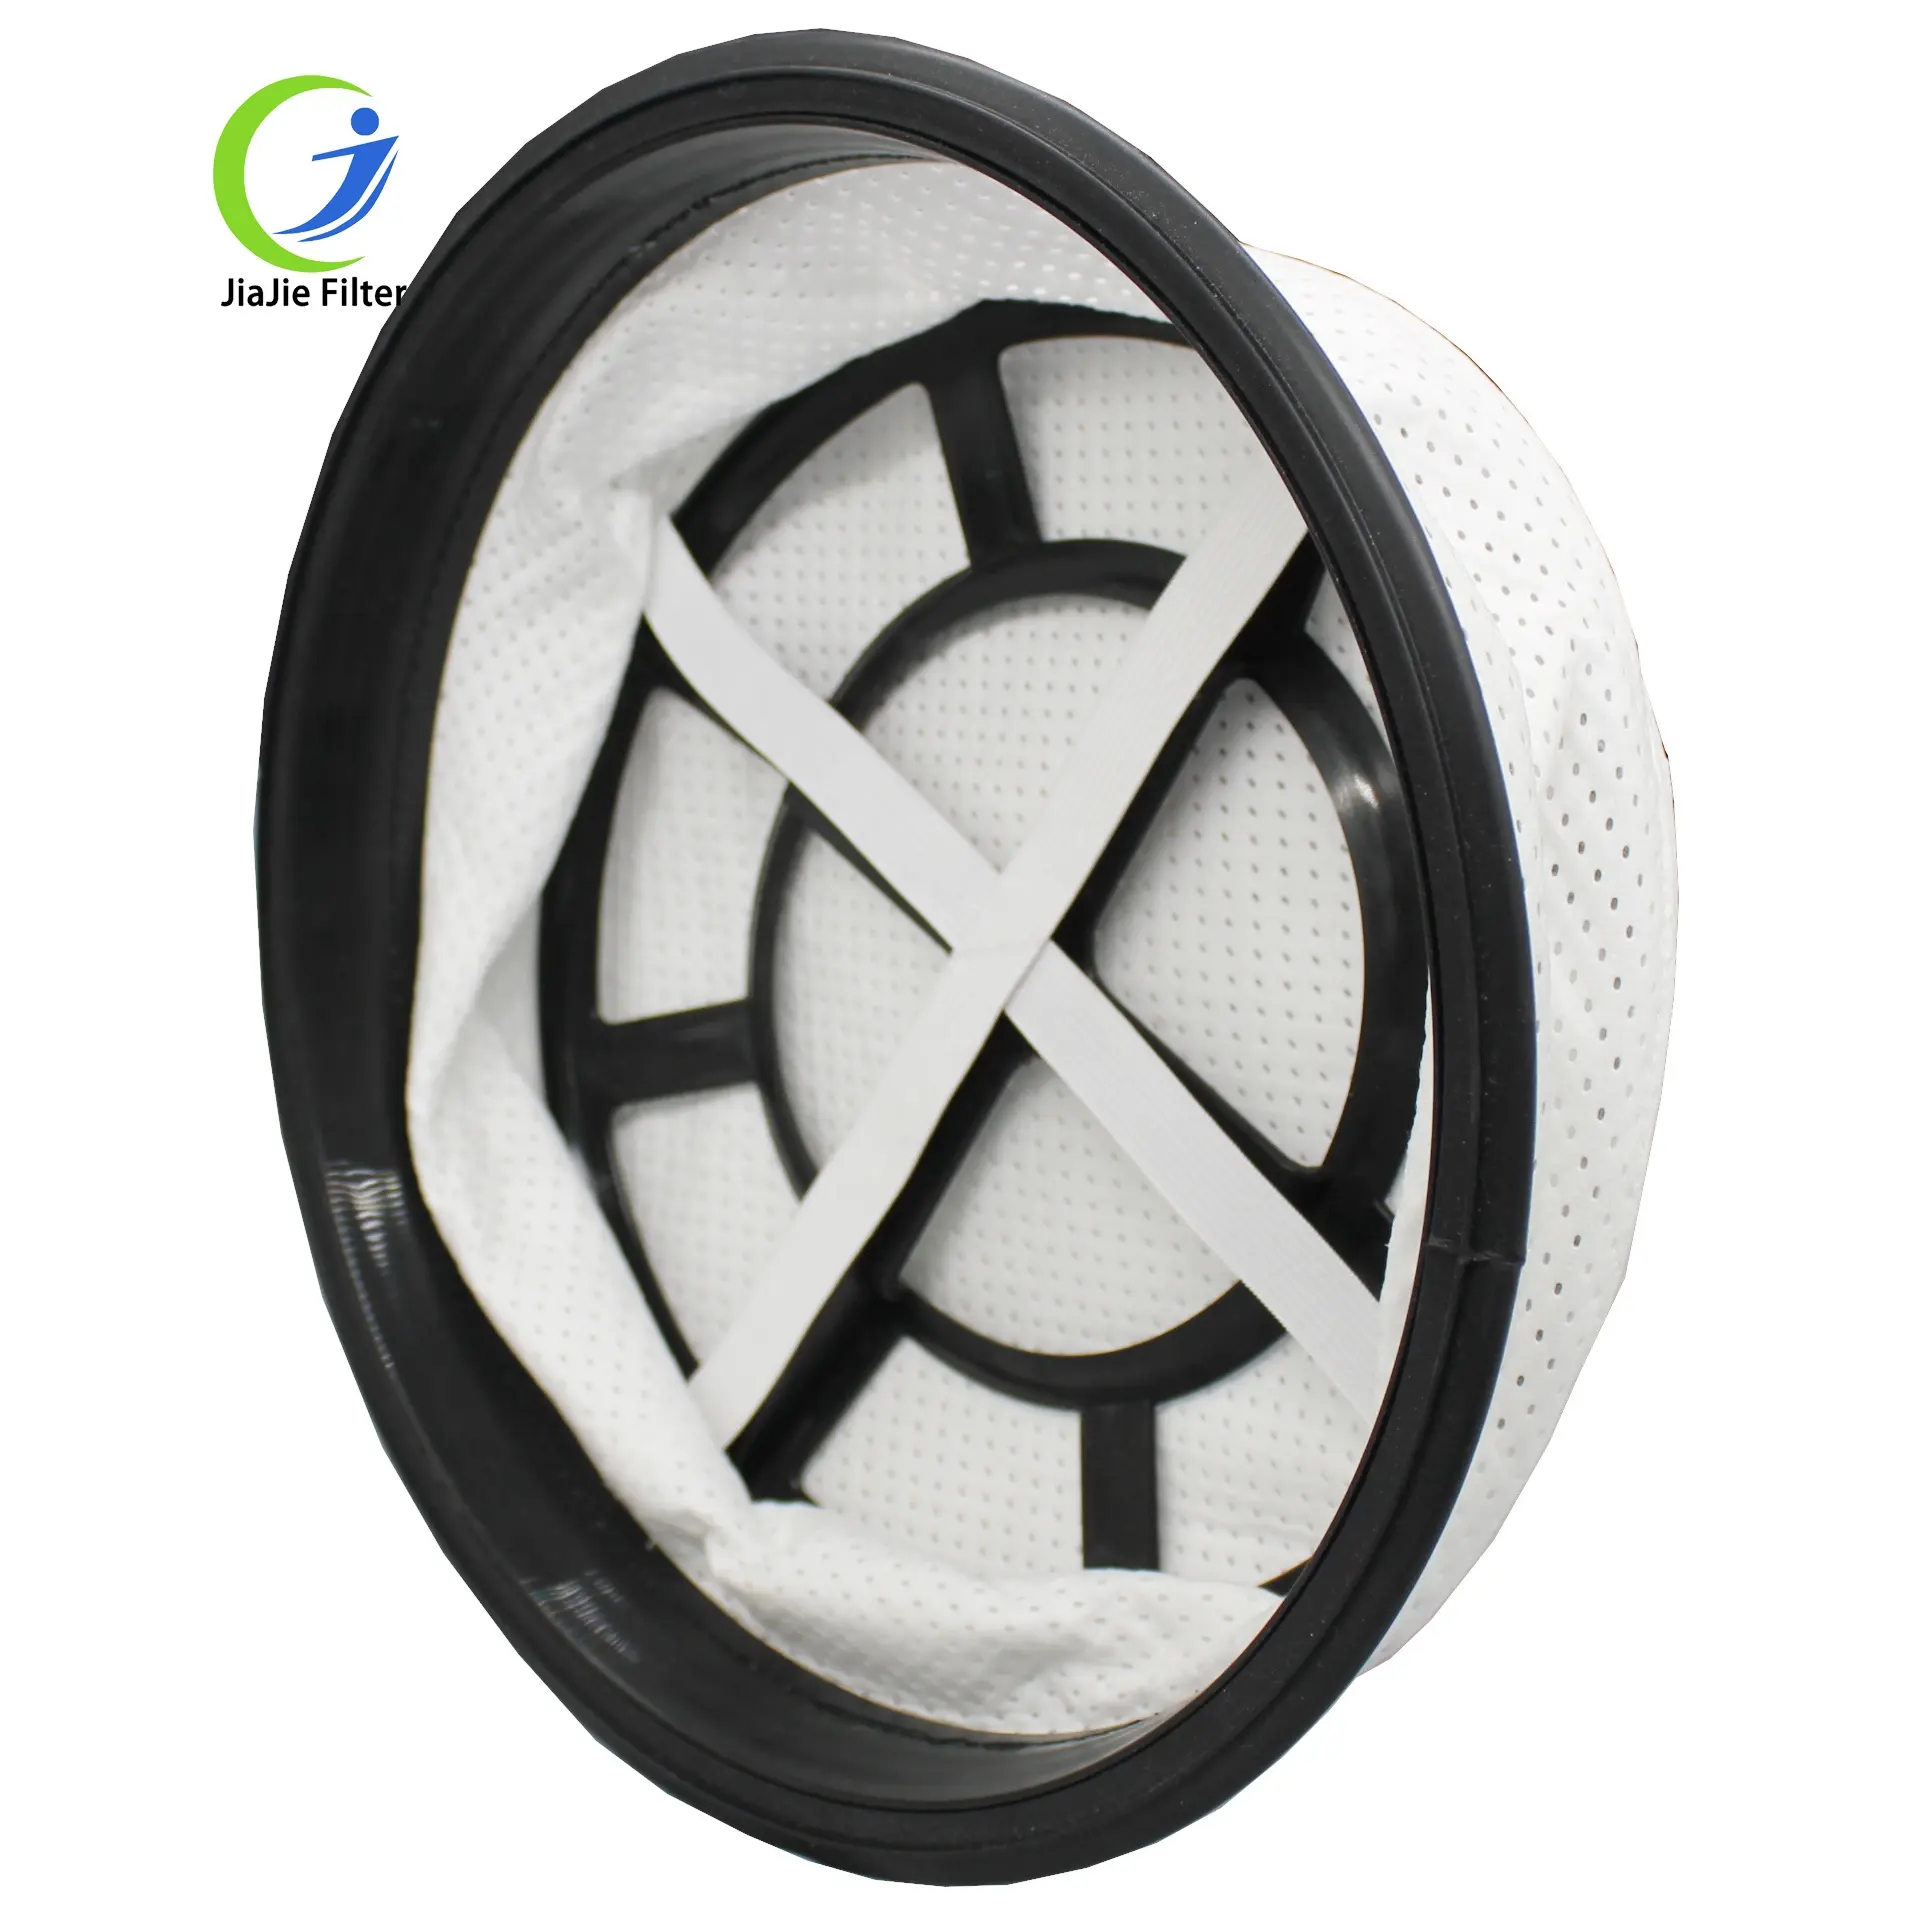 Wholesale Replacement Vacuum Cleaner Round Filter Bags For Numatic Henry James Hetty Harry Vacuum Cleaner 37102 604165 2037023